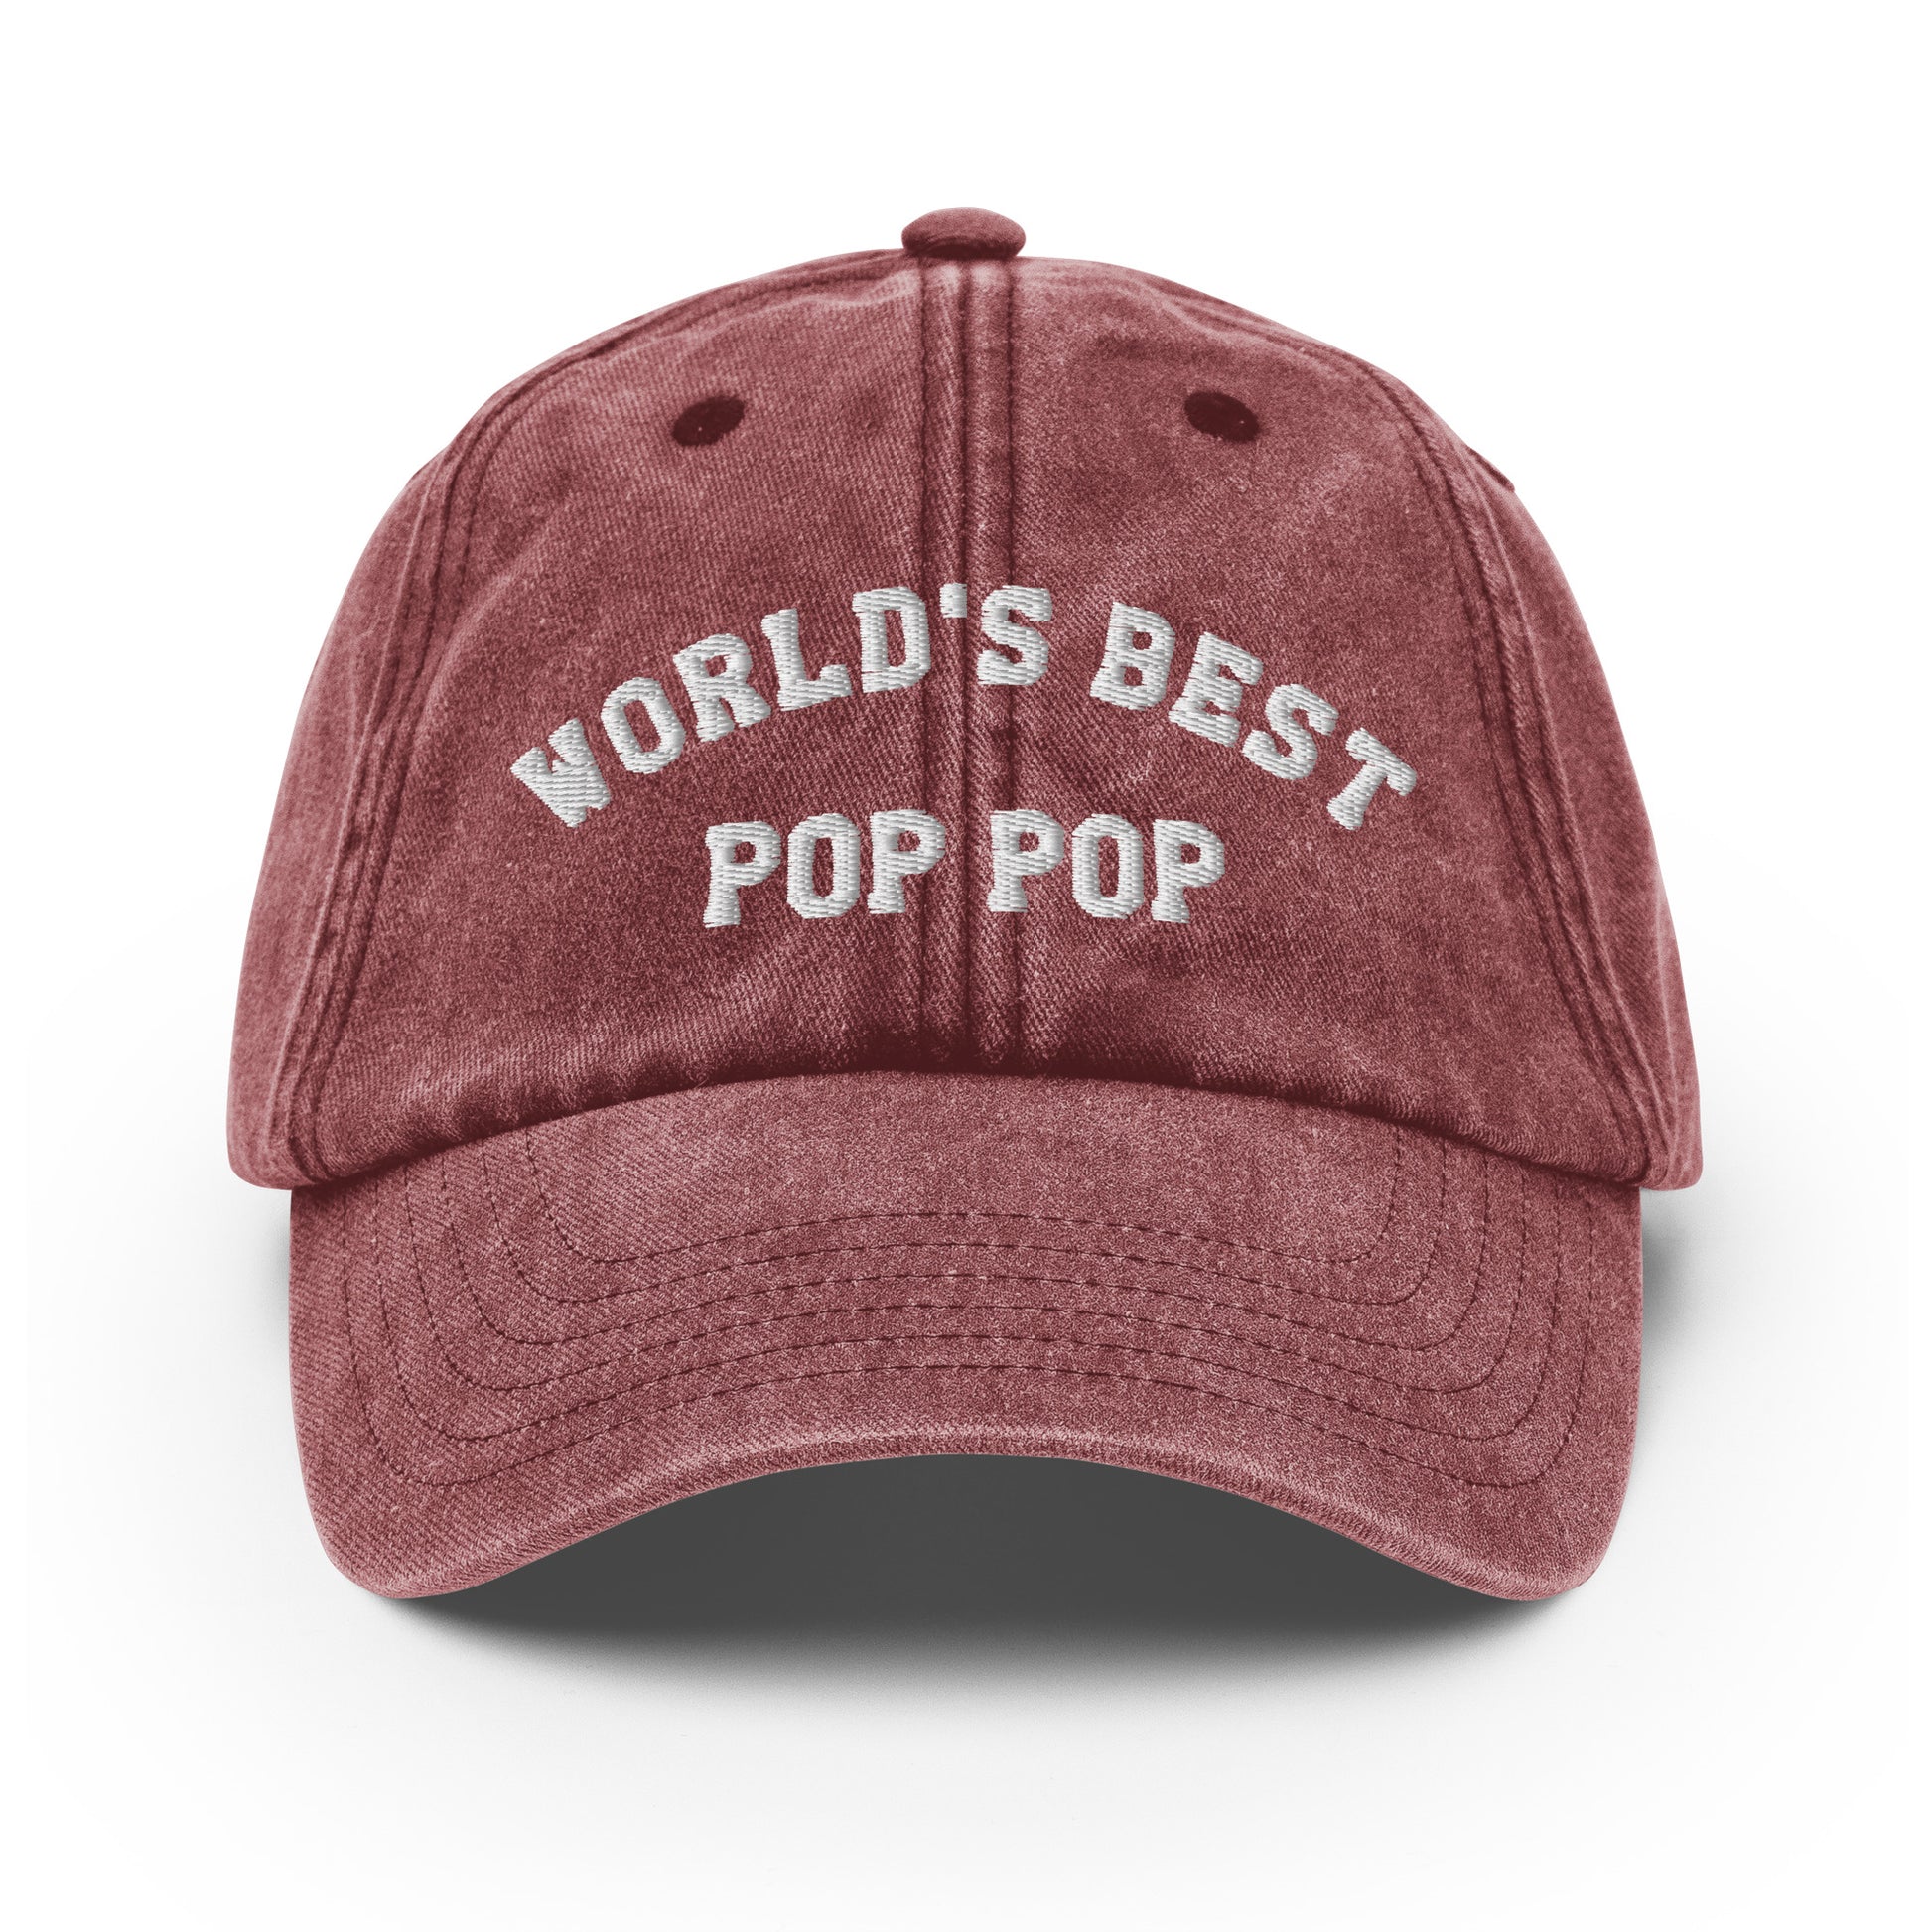 World's Best Pop Pop Vintage Baseball Hat, Dad Cap Trucker Men Grandfather Grandpa Embroidery Embroidered Father's Day Gift Vintage Red